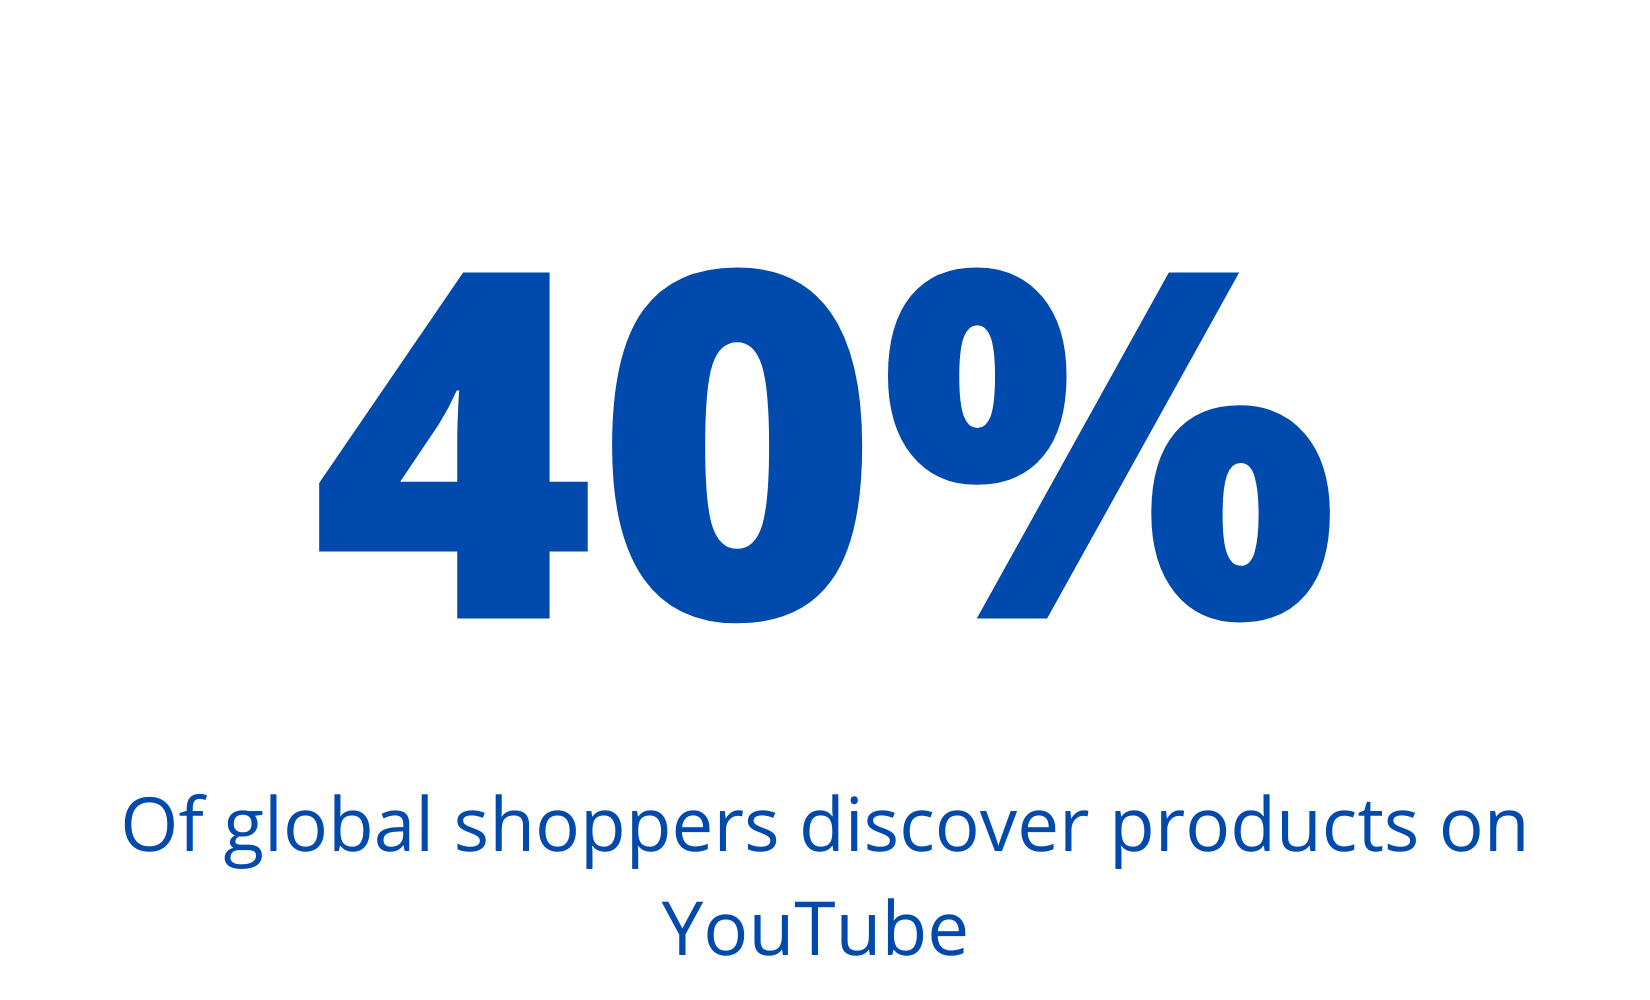 YouTube Marketing Statistics: 40% of global shoppers discover products through YouTube